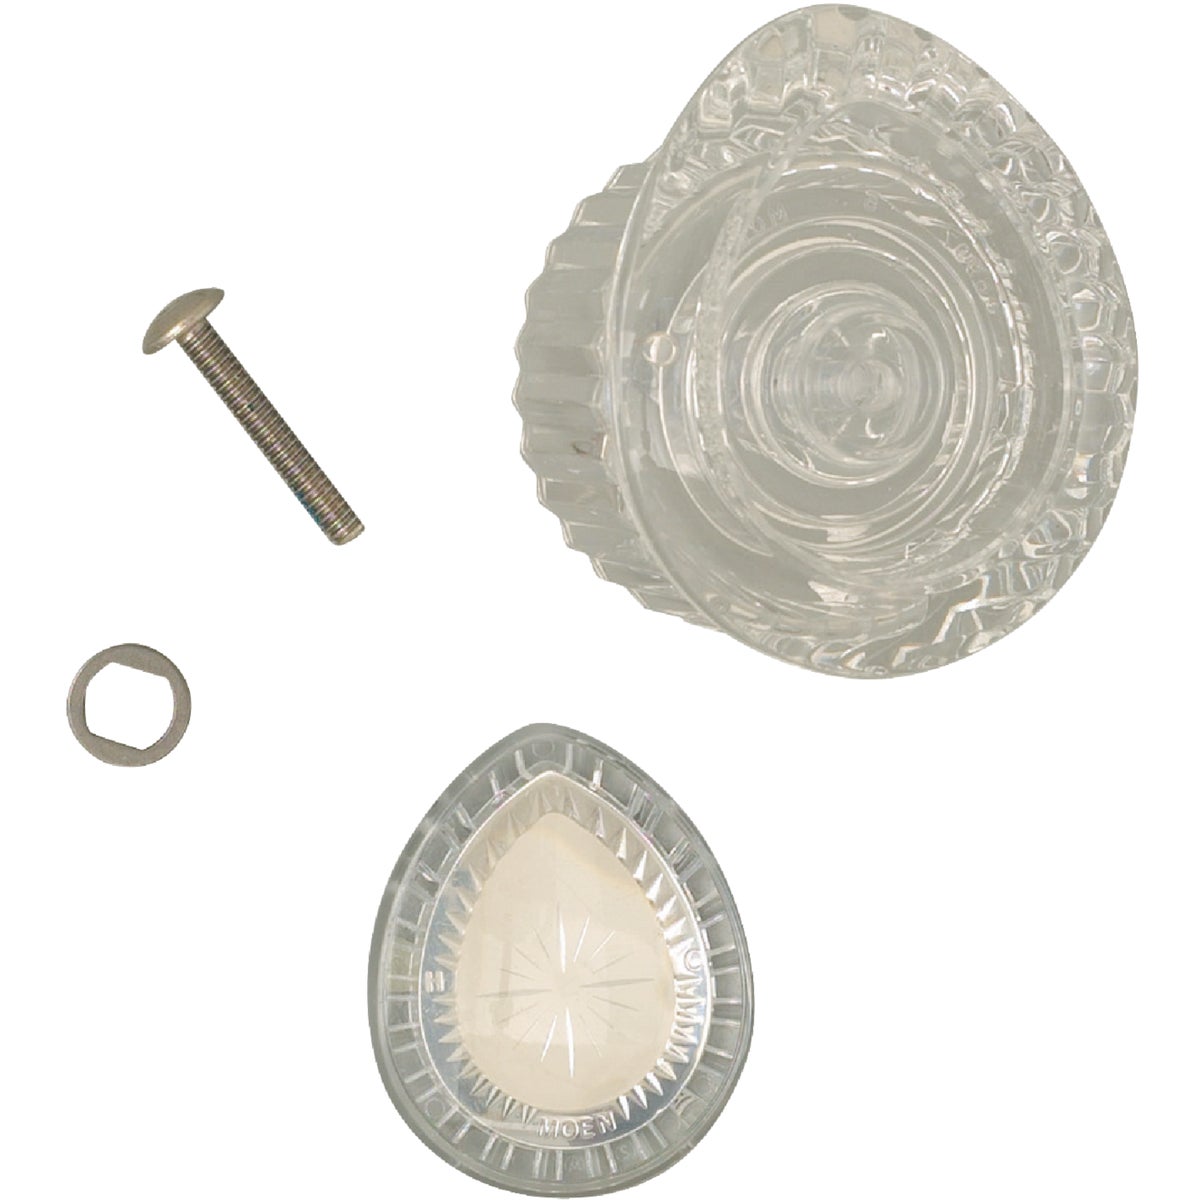 Item 479136, Clear, acrylic replacement knob for Posi-Temp tub &amp; shower.